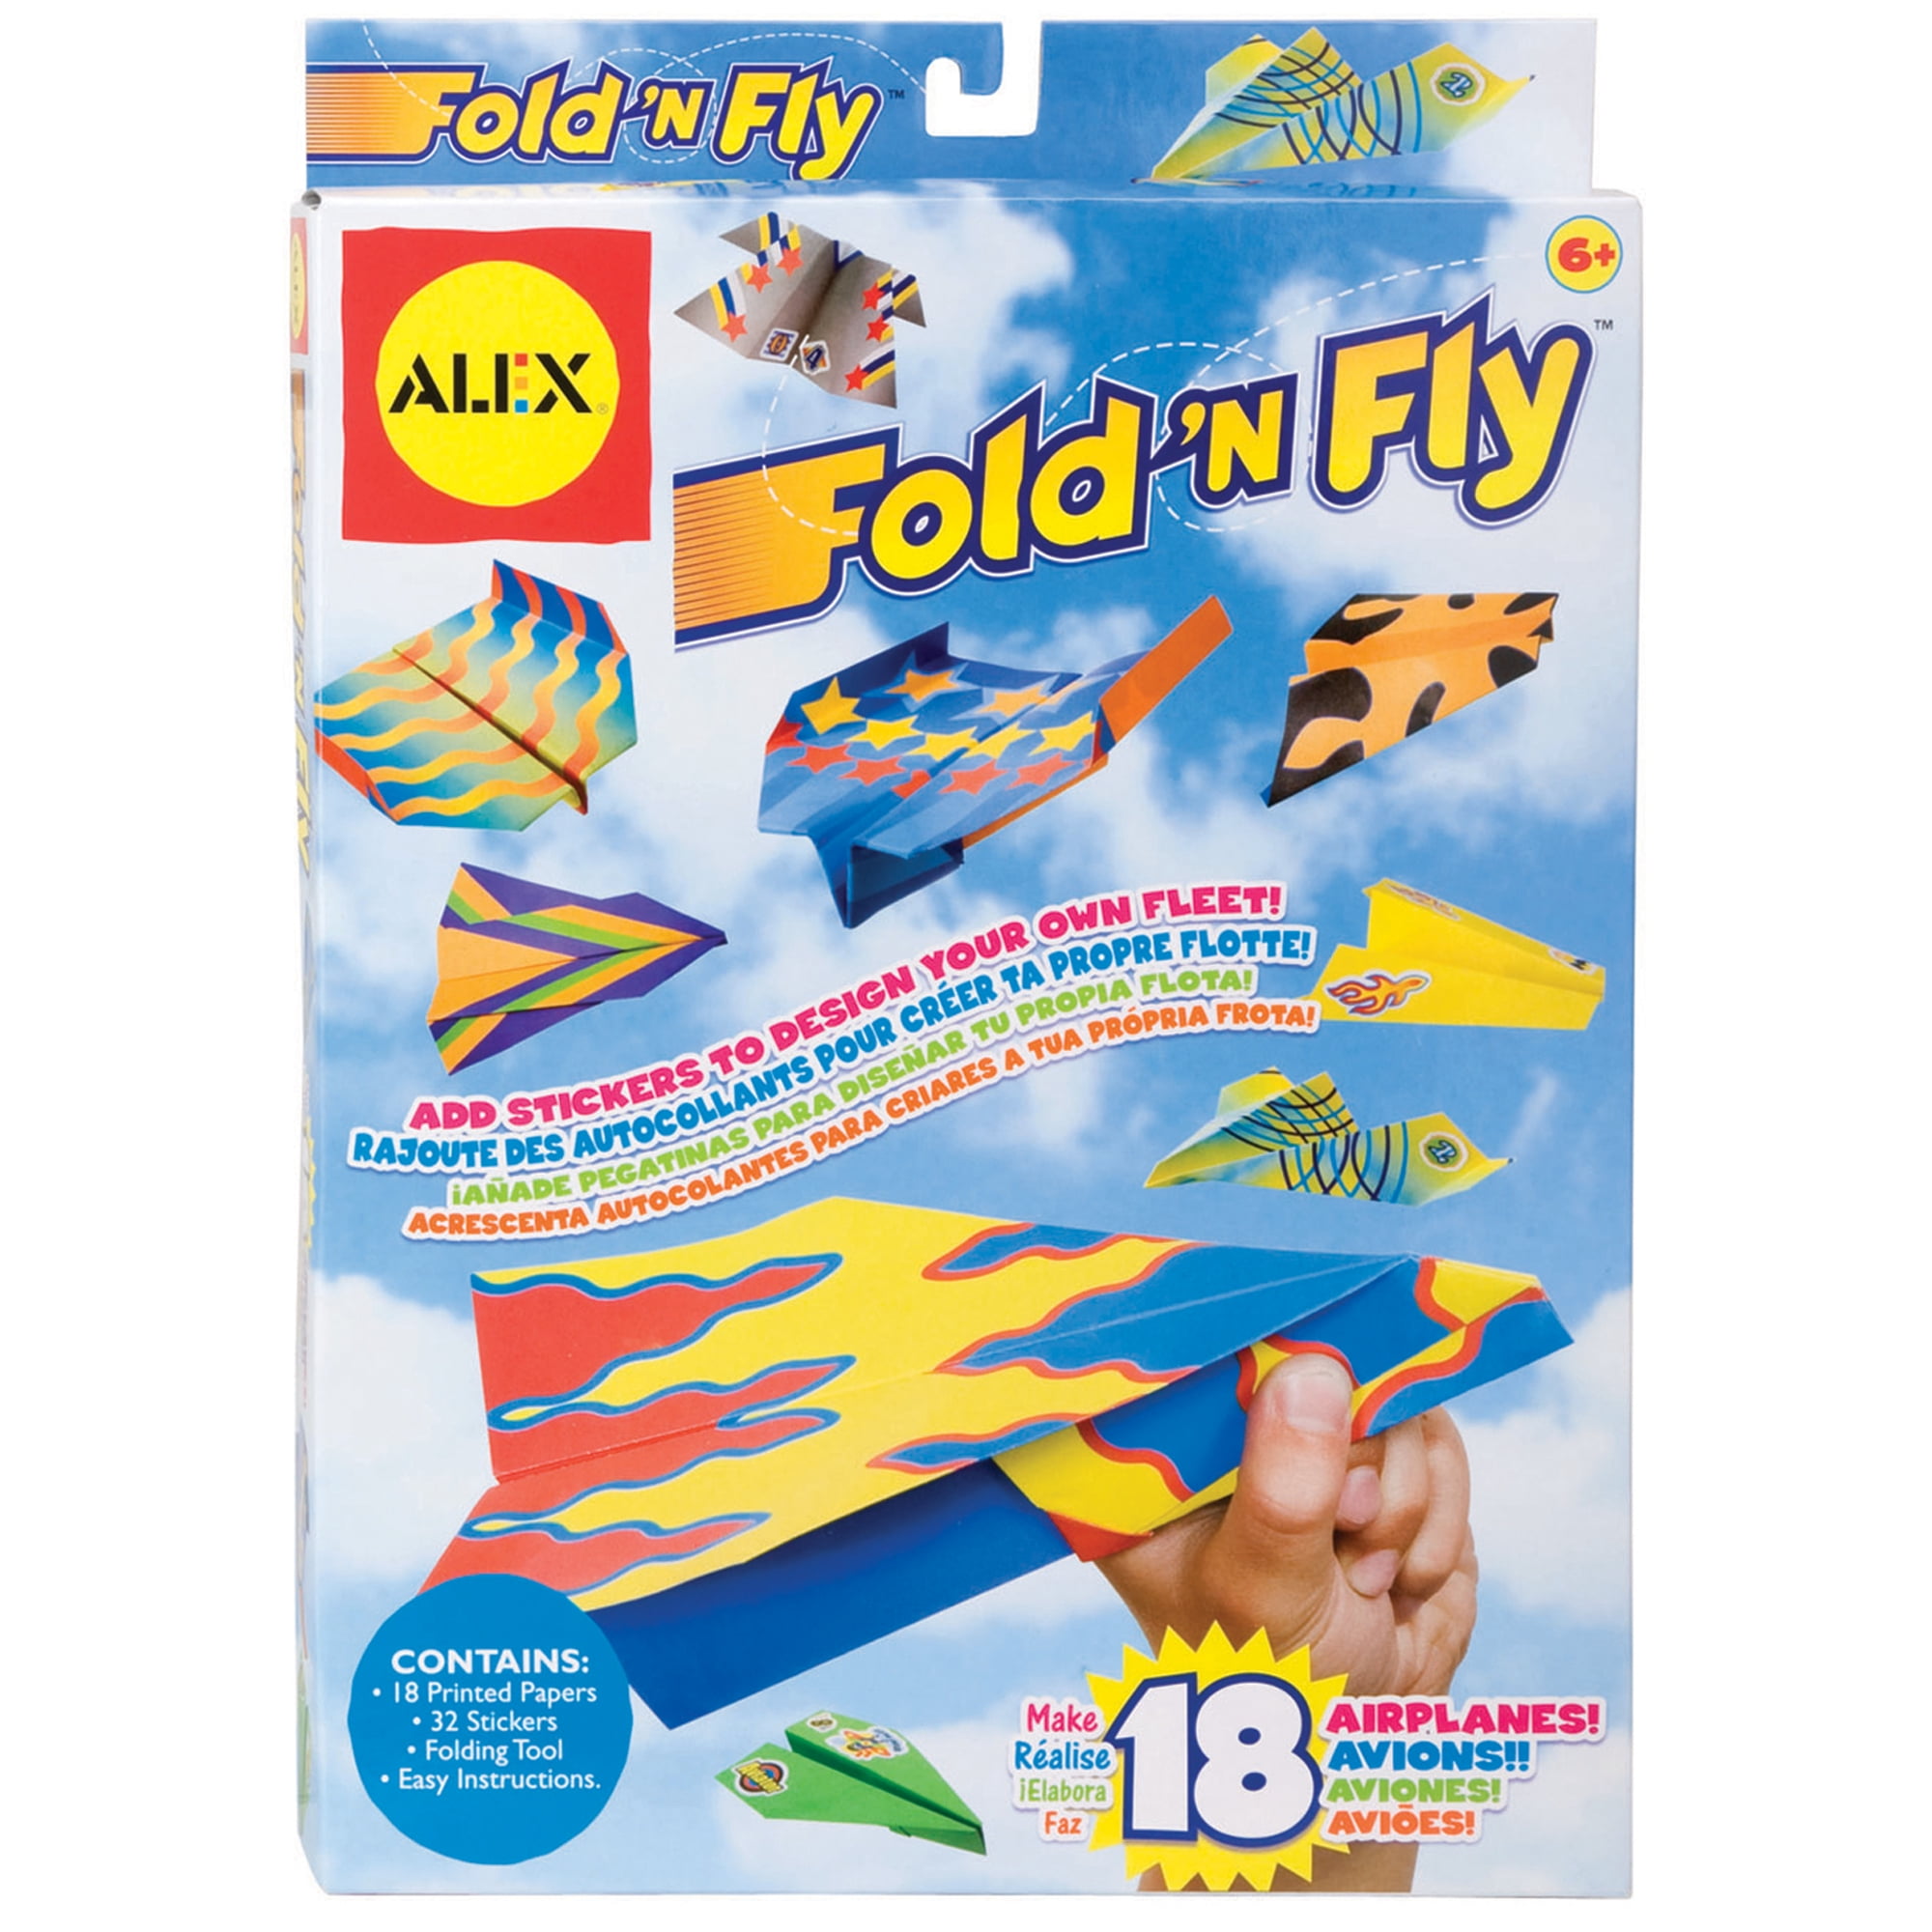 fold-n-fly-paper-airplanes-set-of-3-boxes-walmart